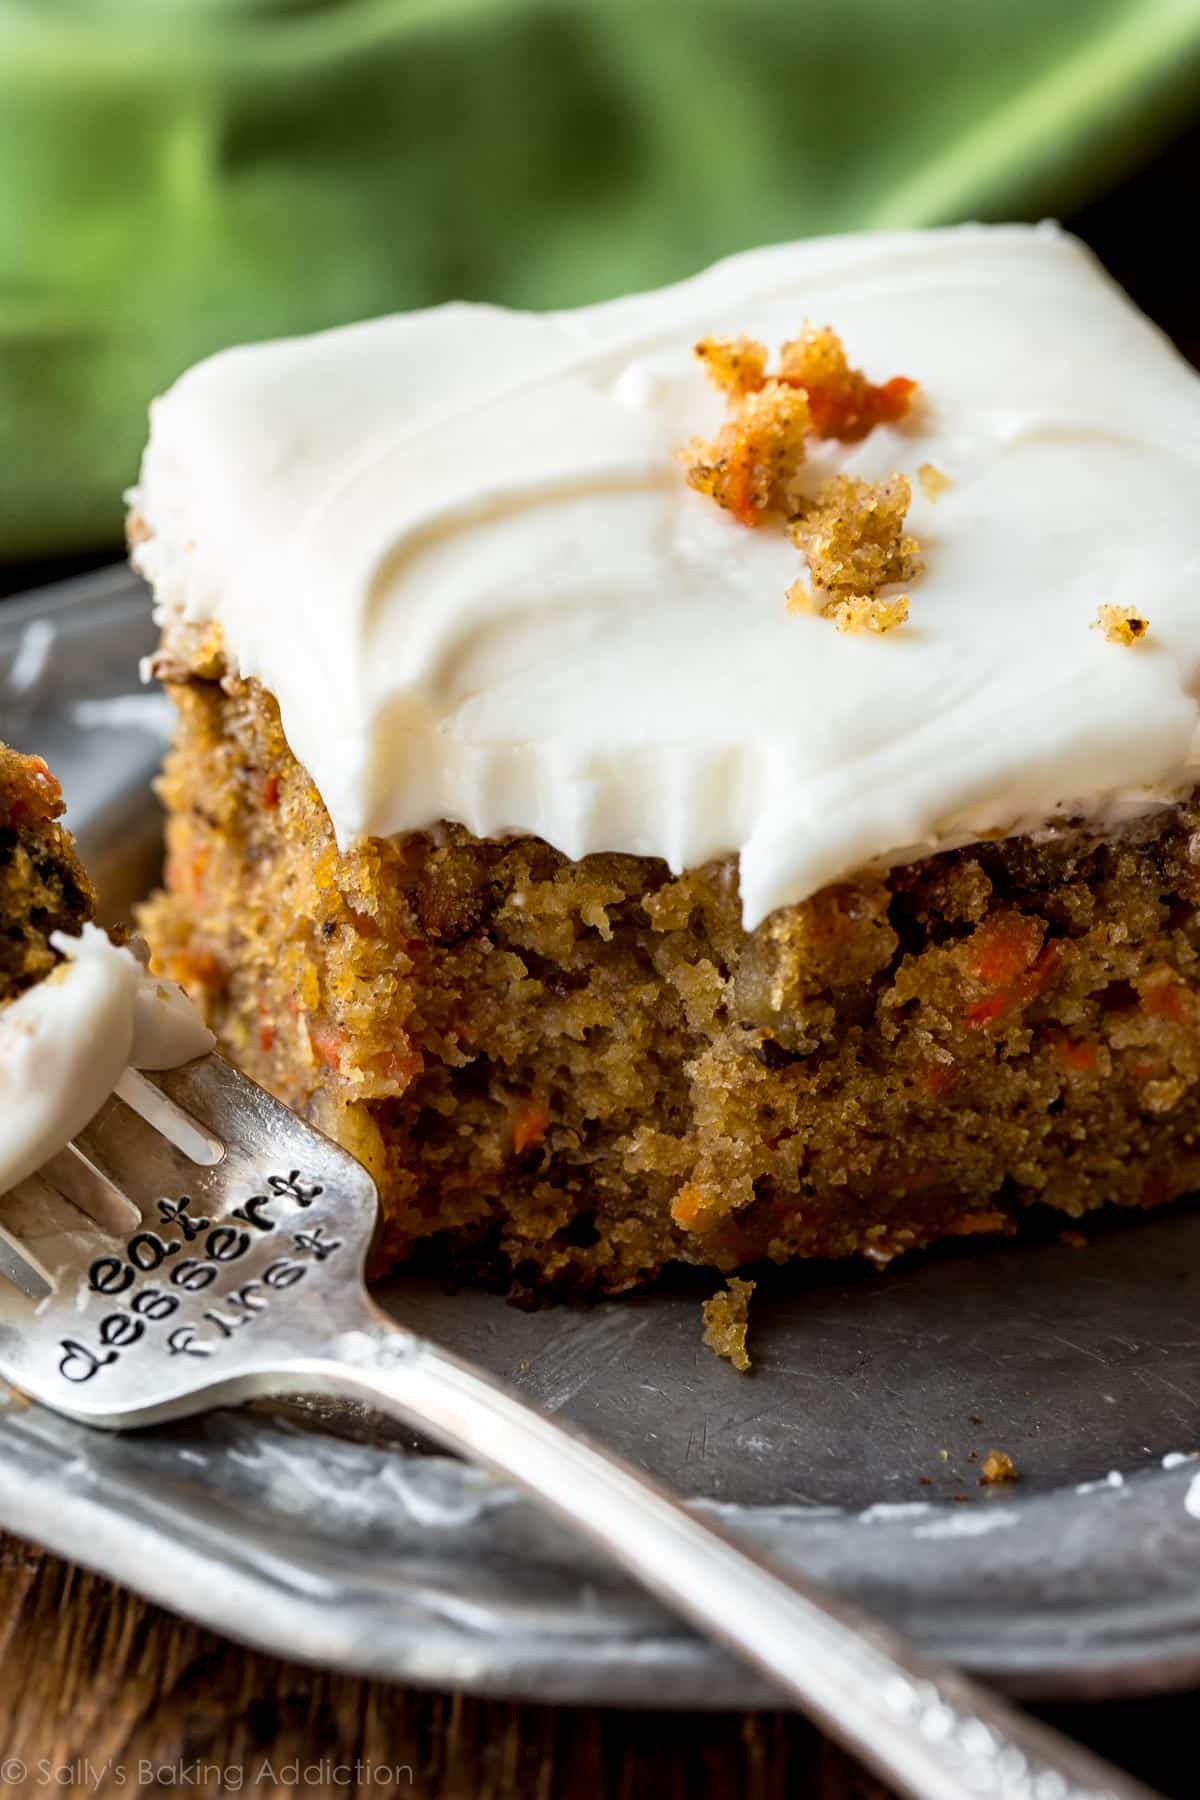 Pineapple Carrot Cake with Cream Cheese Frosting - Sallys Baking Addiction